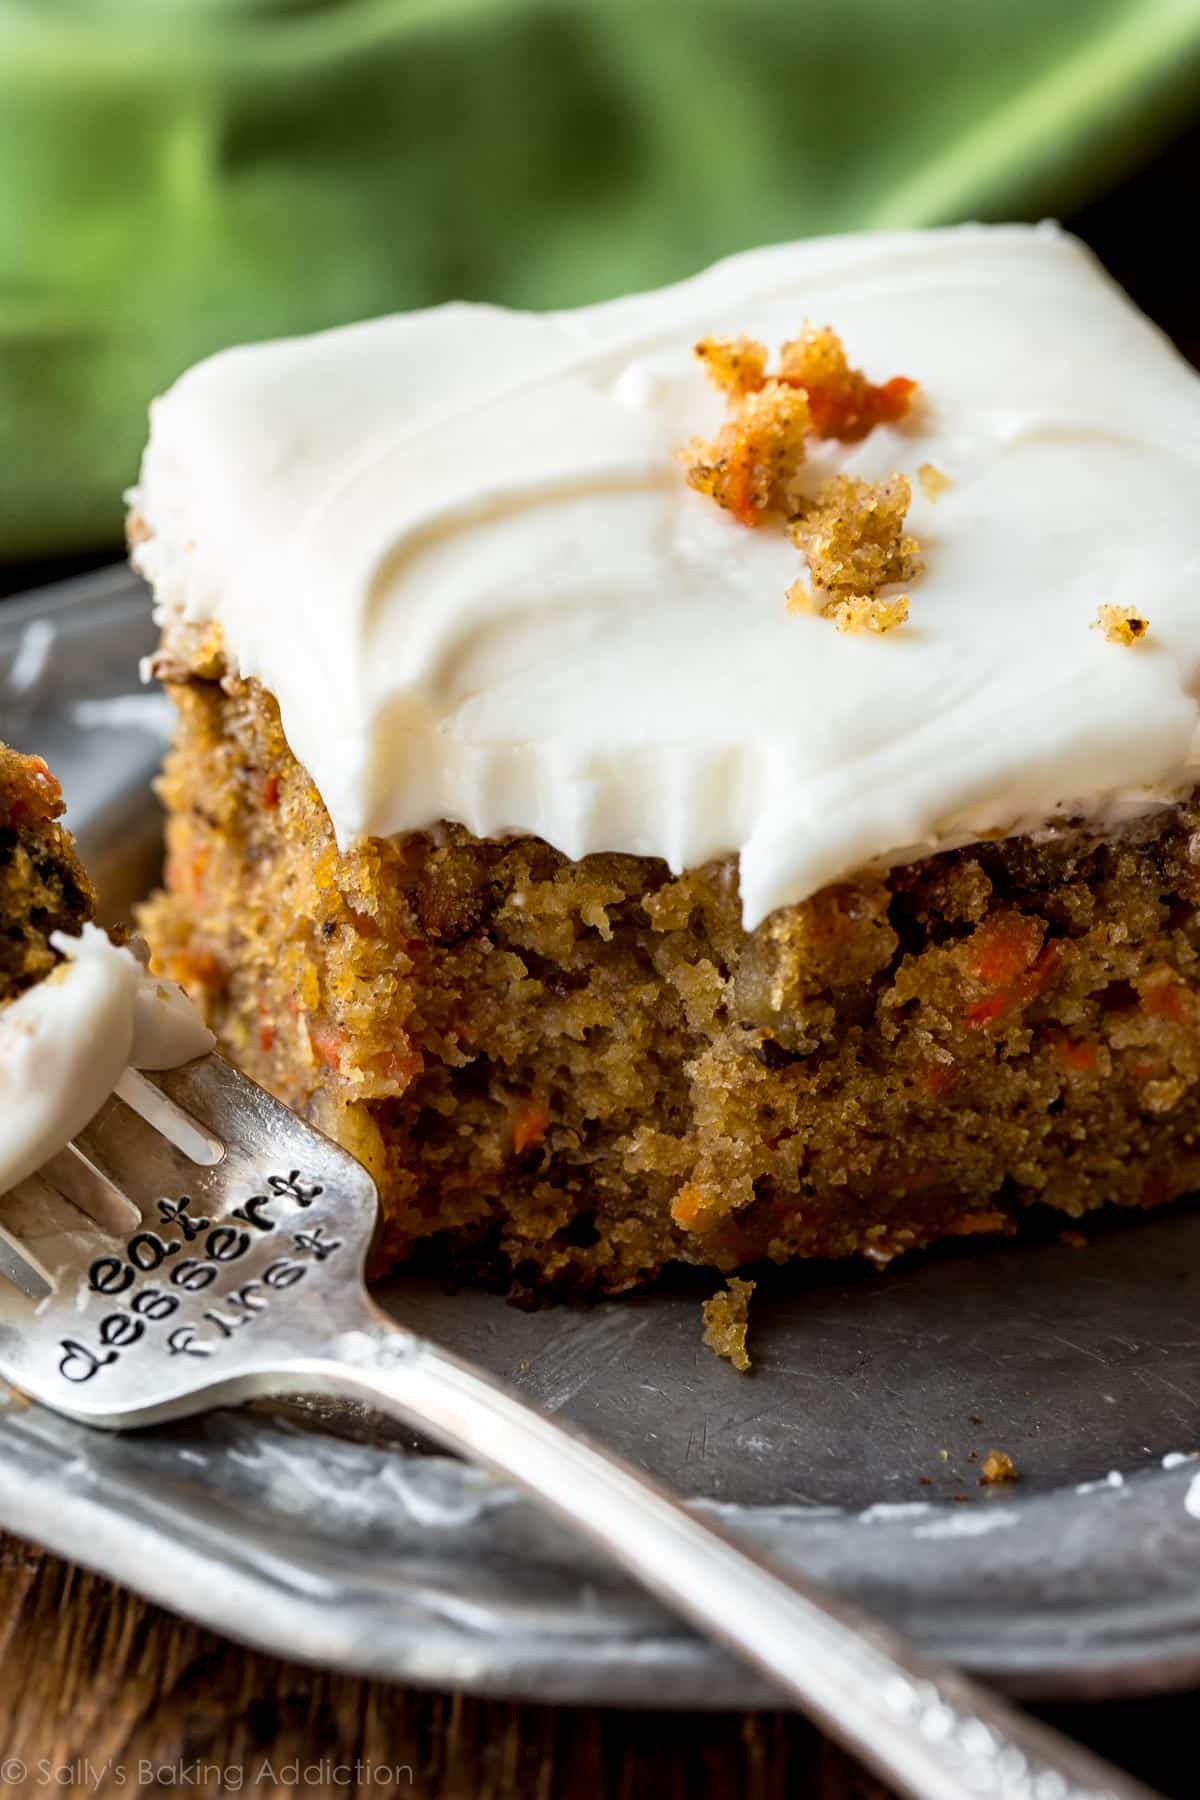 Pineapple Carrot Cake with Cream Cheese Frosting - Sallys Baking Addiction